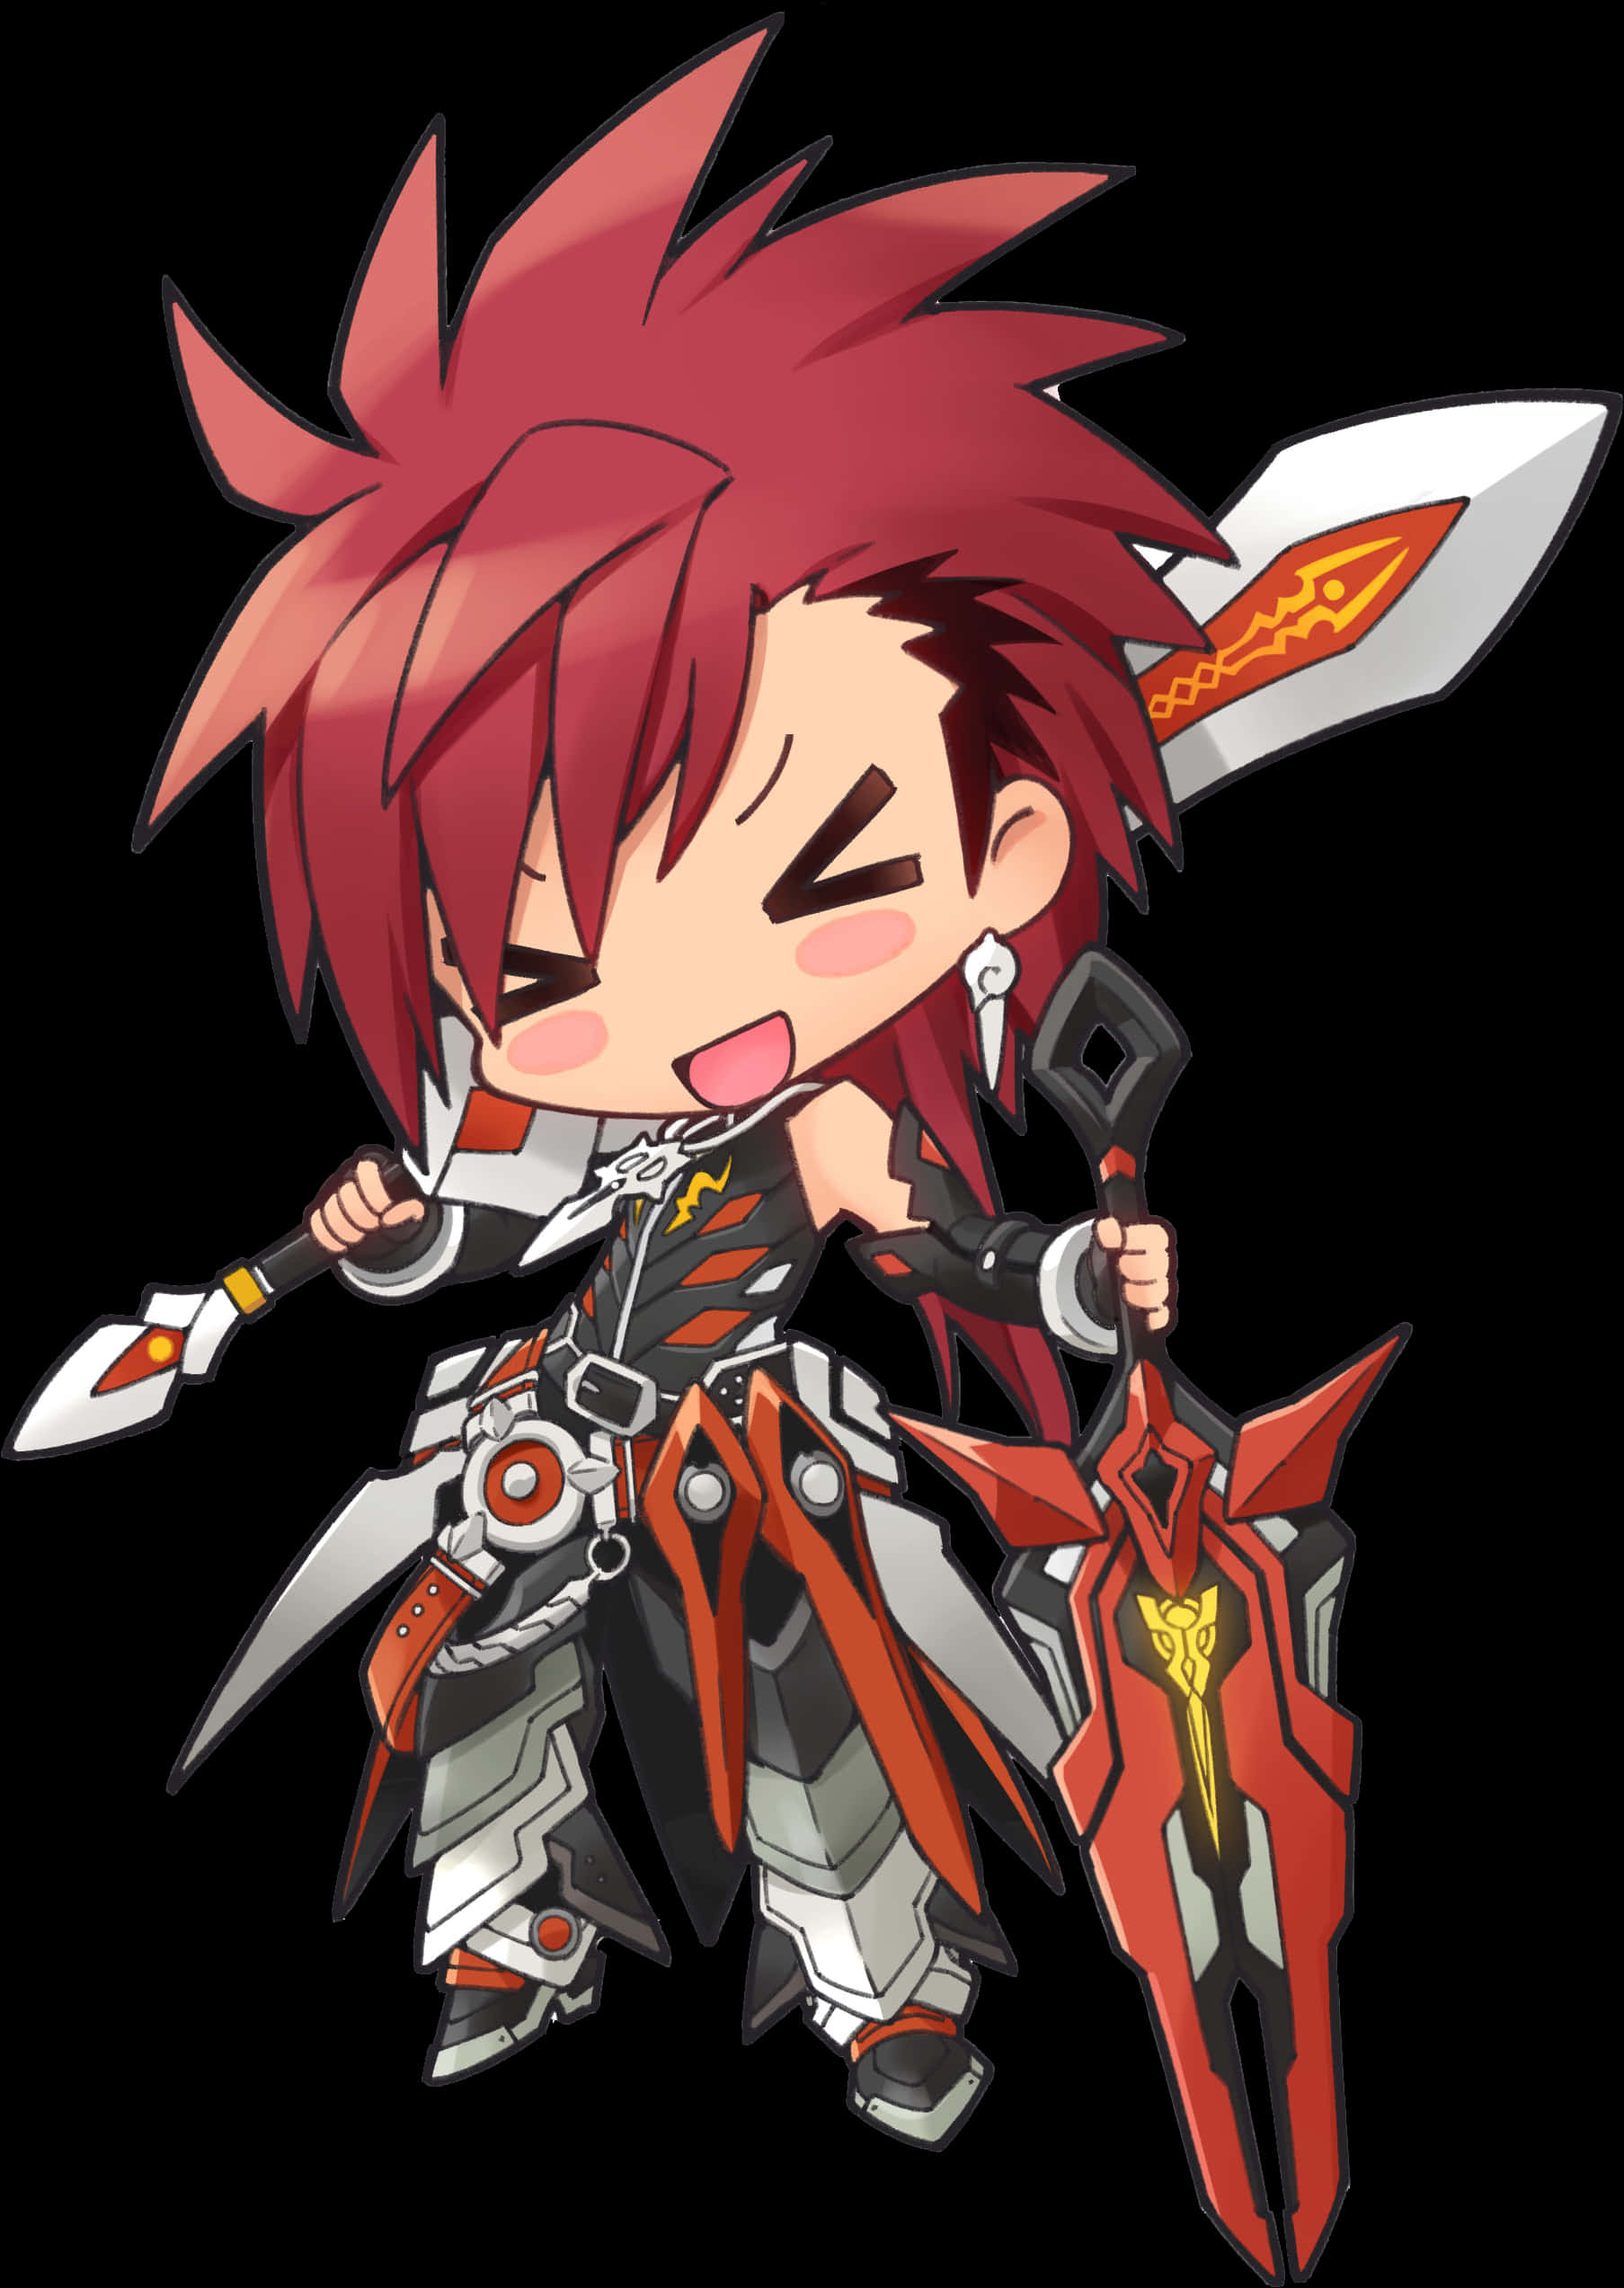 A Cartoon Character With Red Hair And Sword